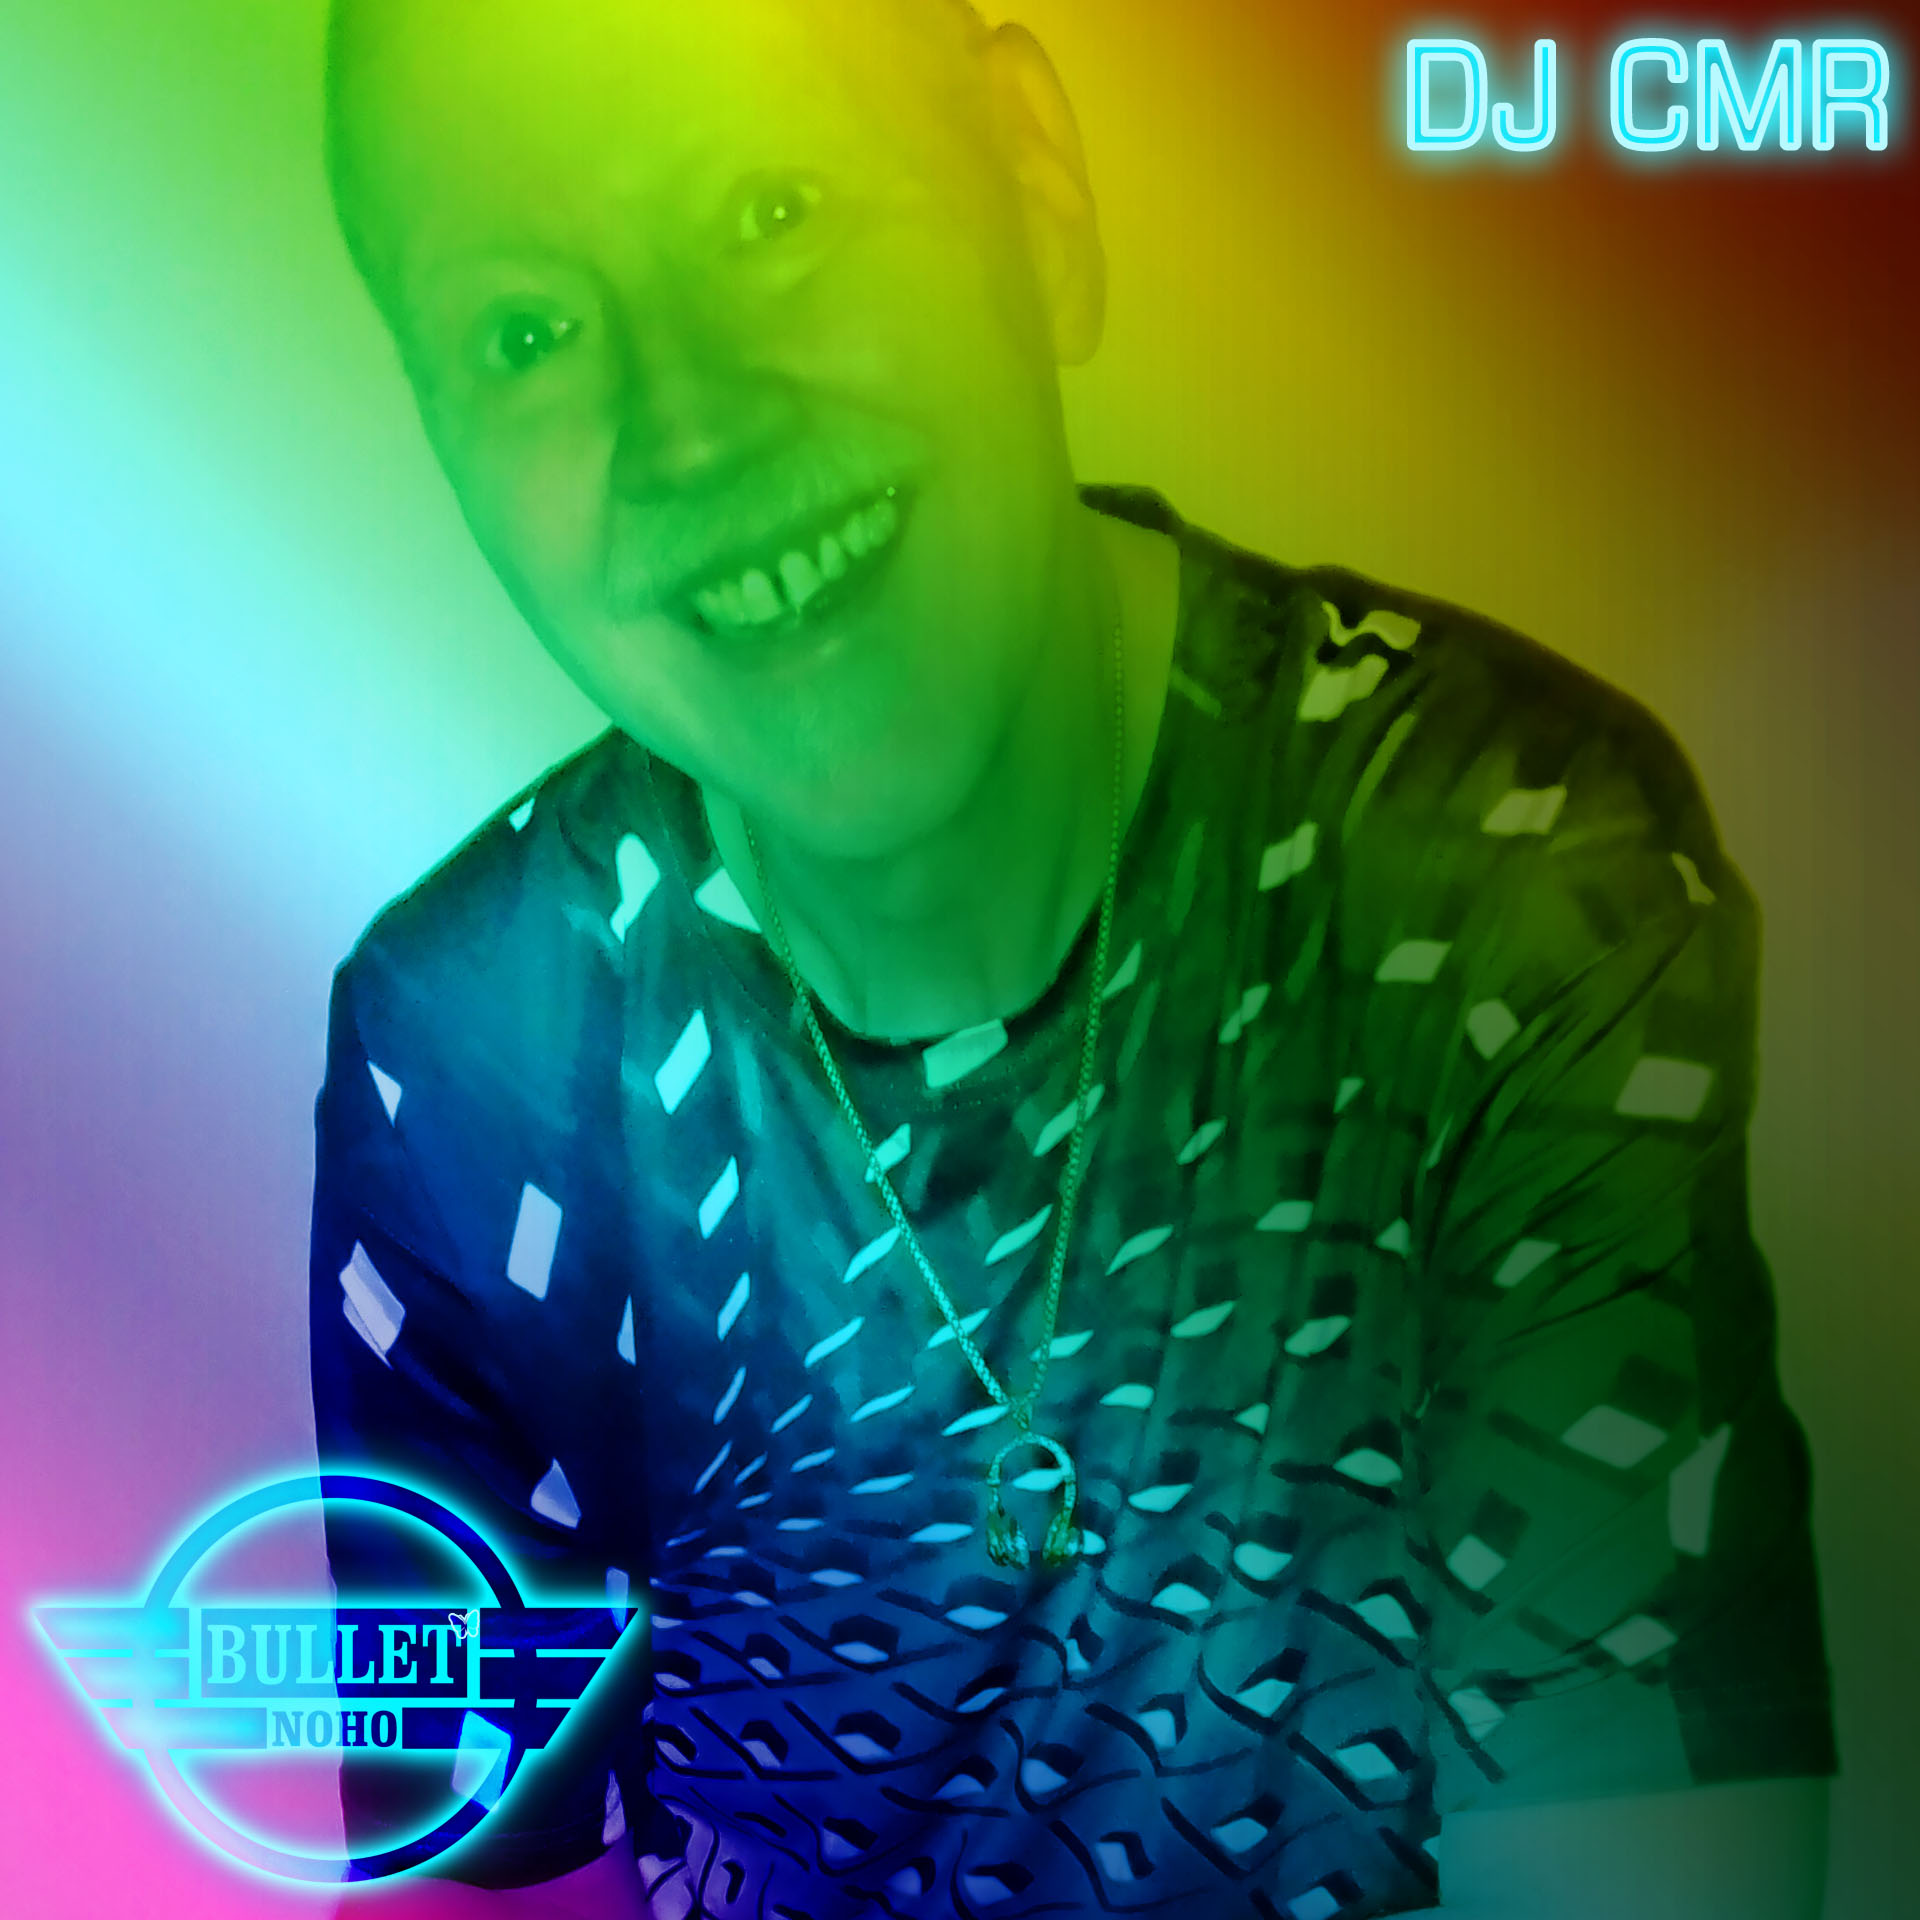 DJ CMR: Friday, August 26, 2022 from 8:00 PM to 2:00 AM